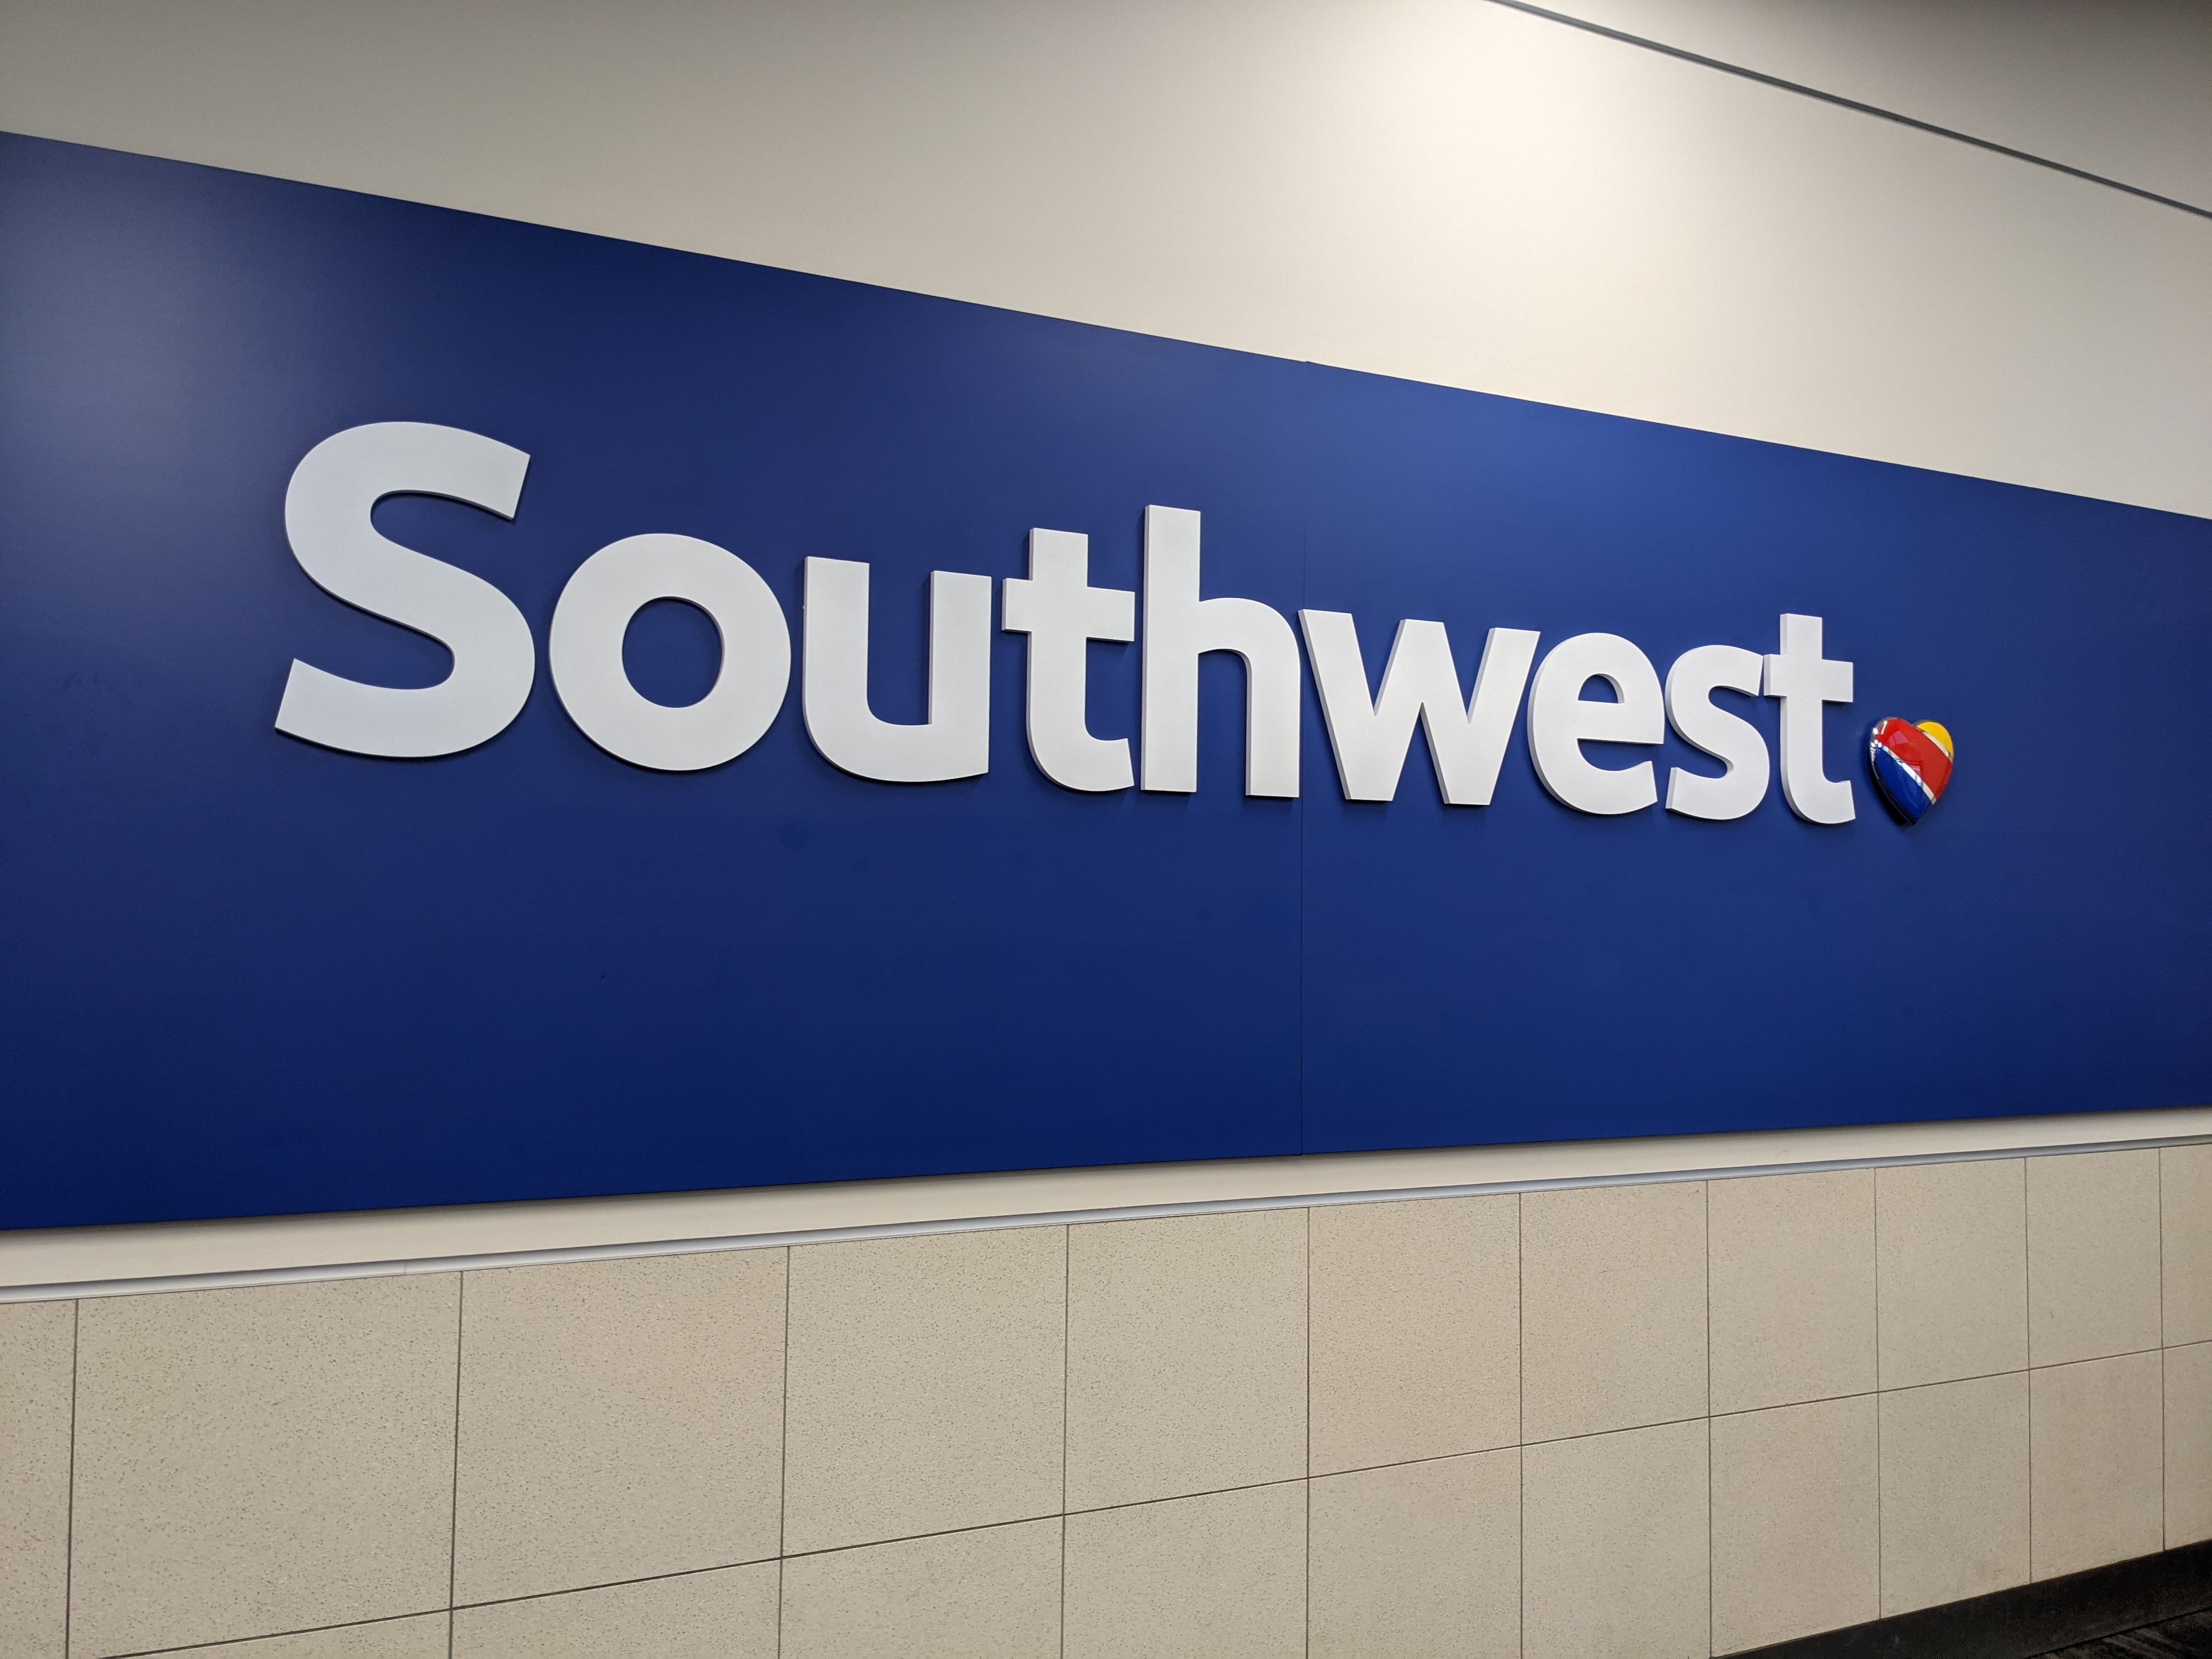 Southwest Carry On Restrictions OFF52 Shipping Free 58 OFF